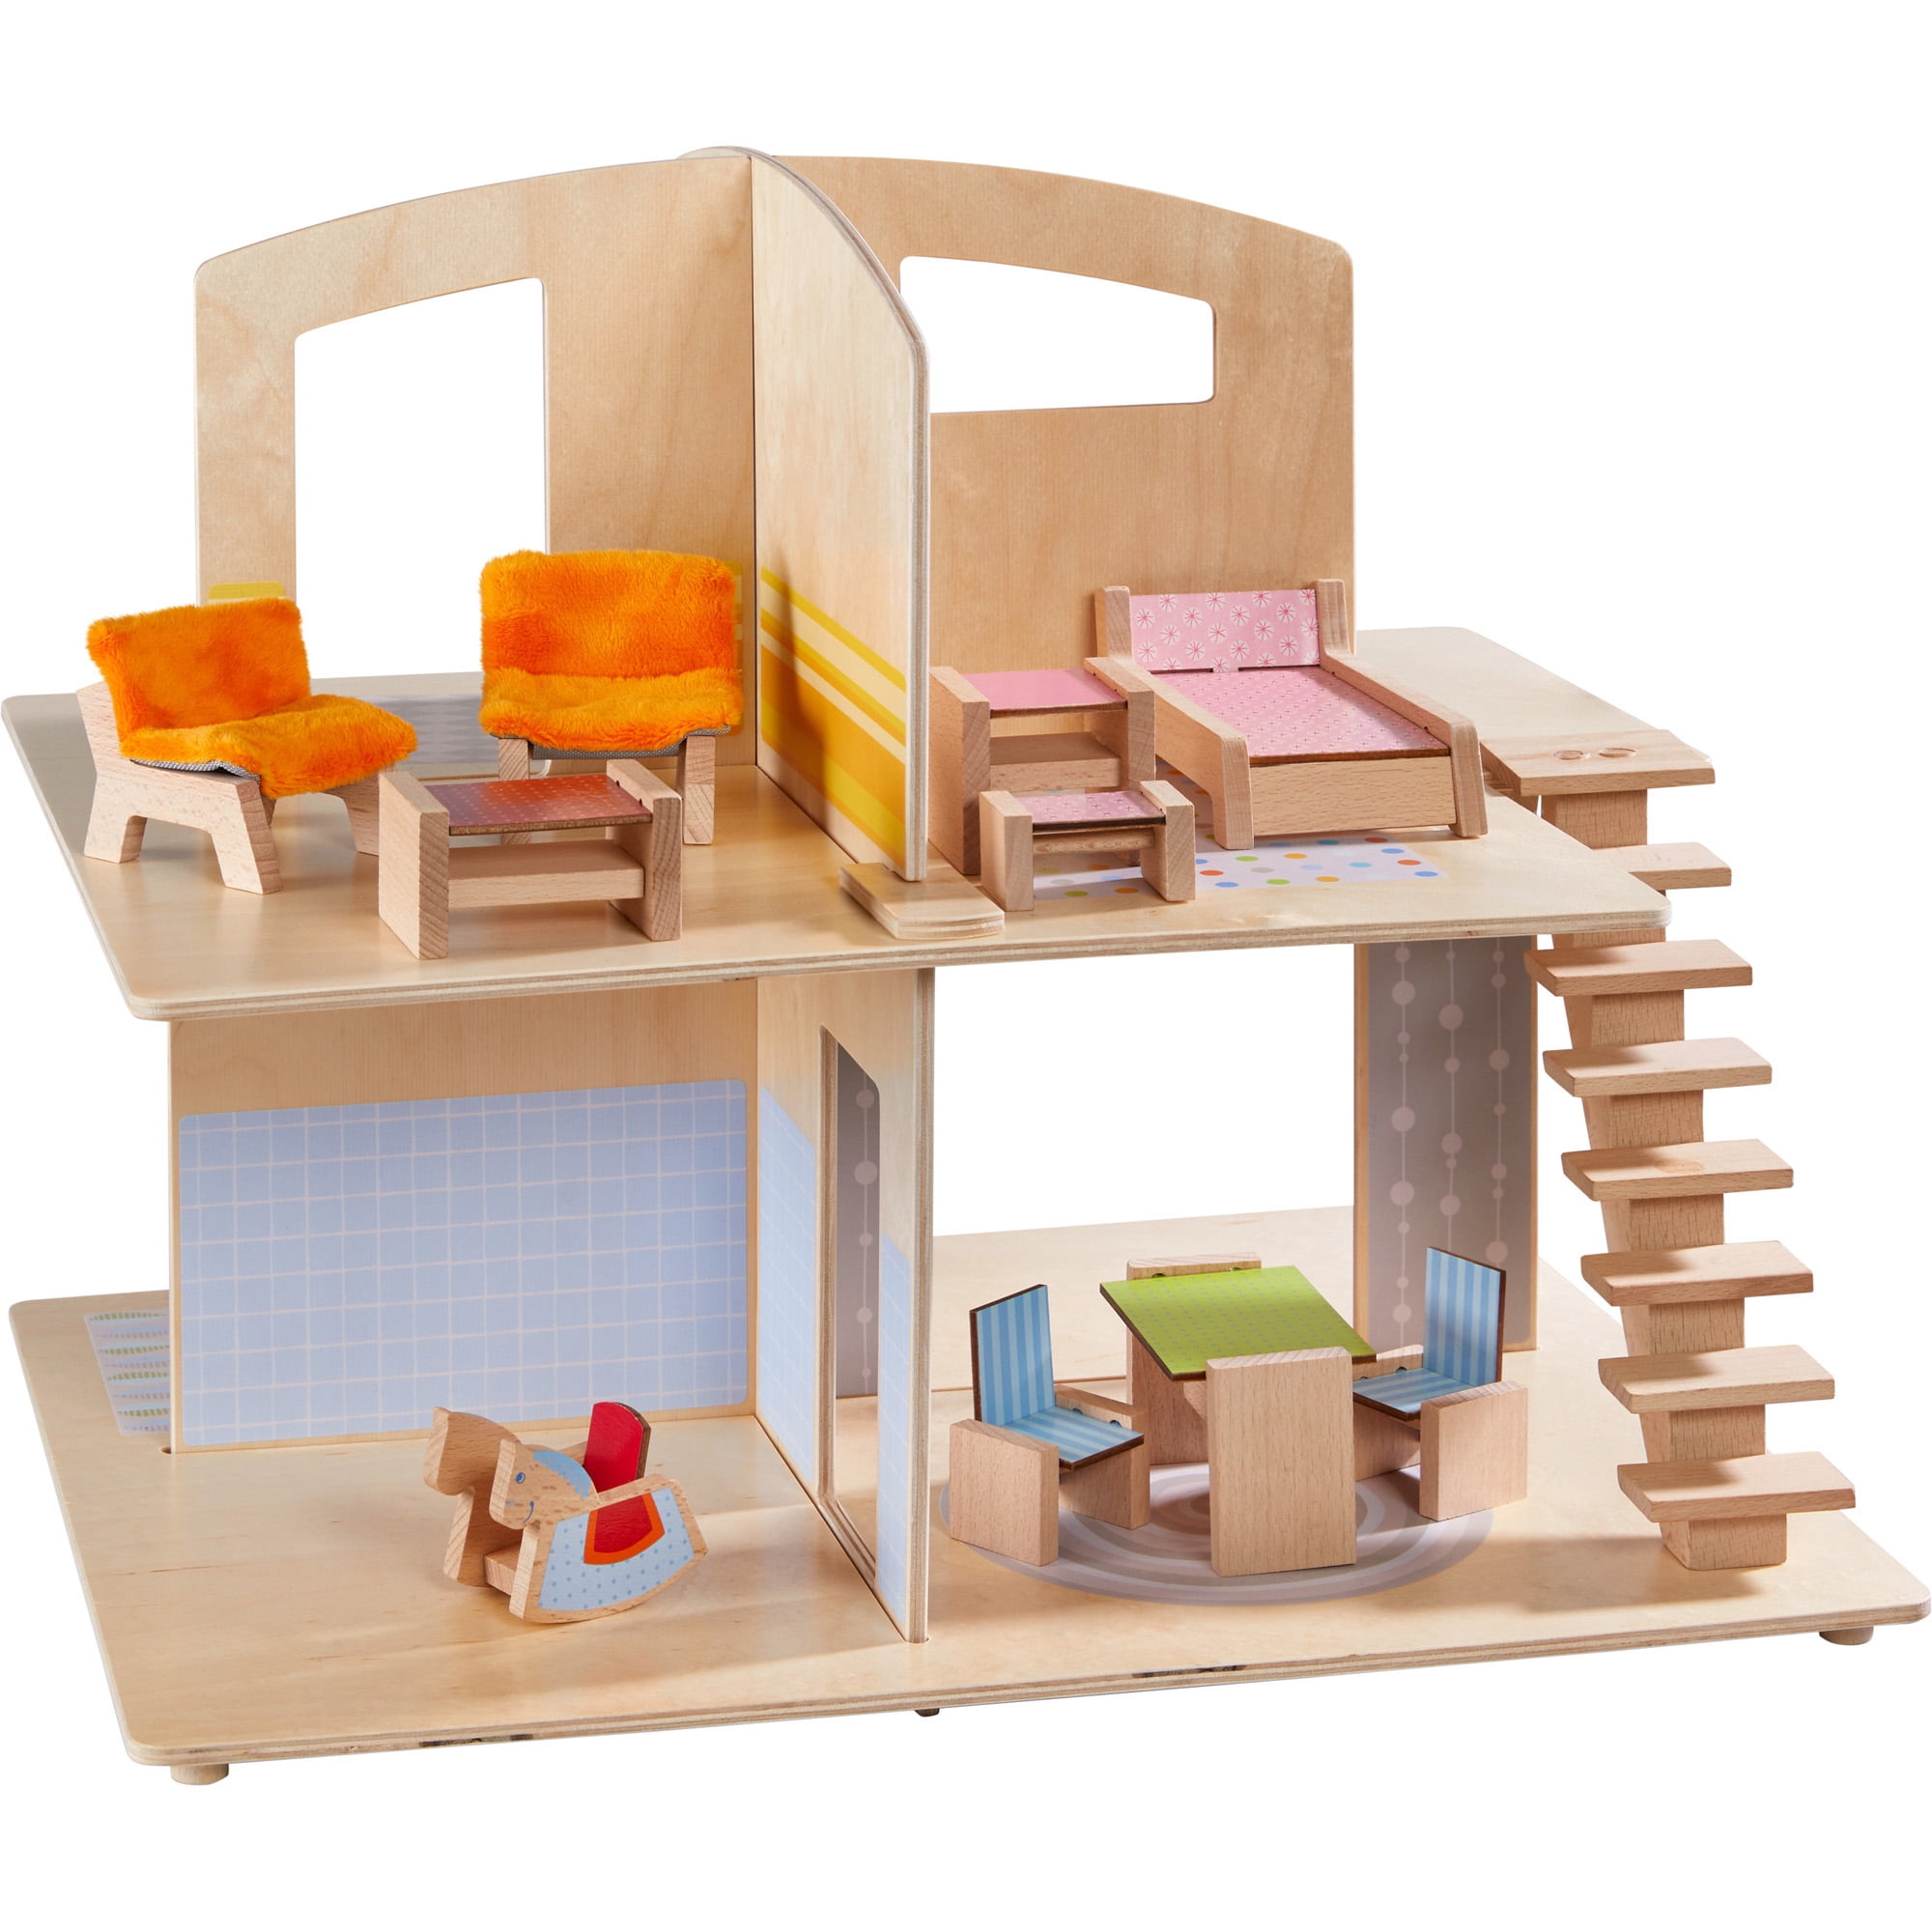 Boley American Doll House - 21 Pc Kids & Toddler Toy House Playset with  Small Furniture & Dolls